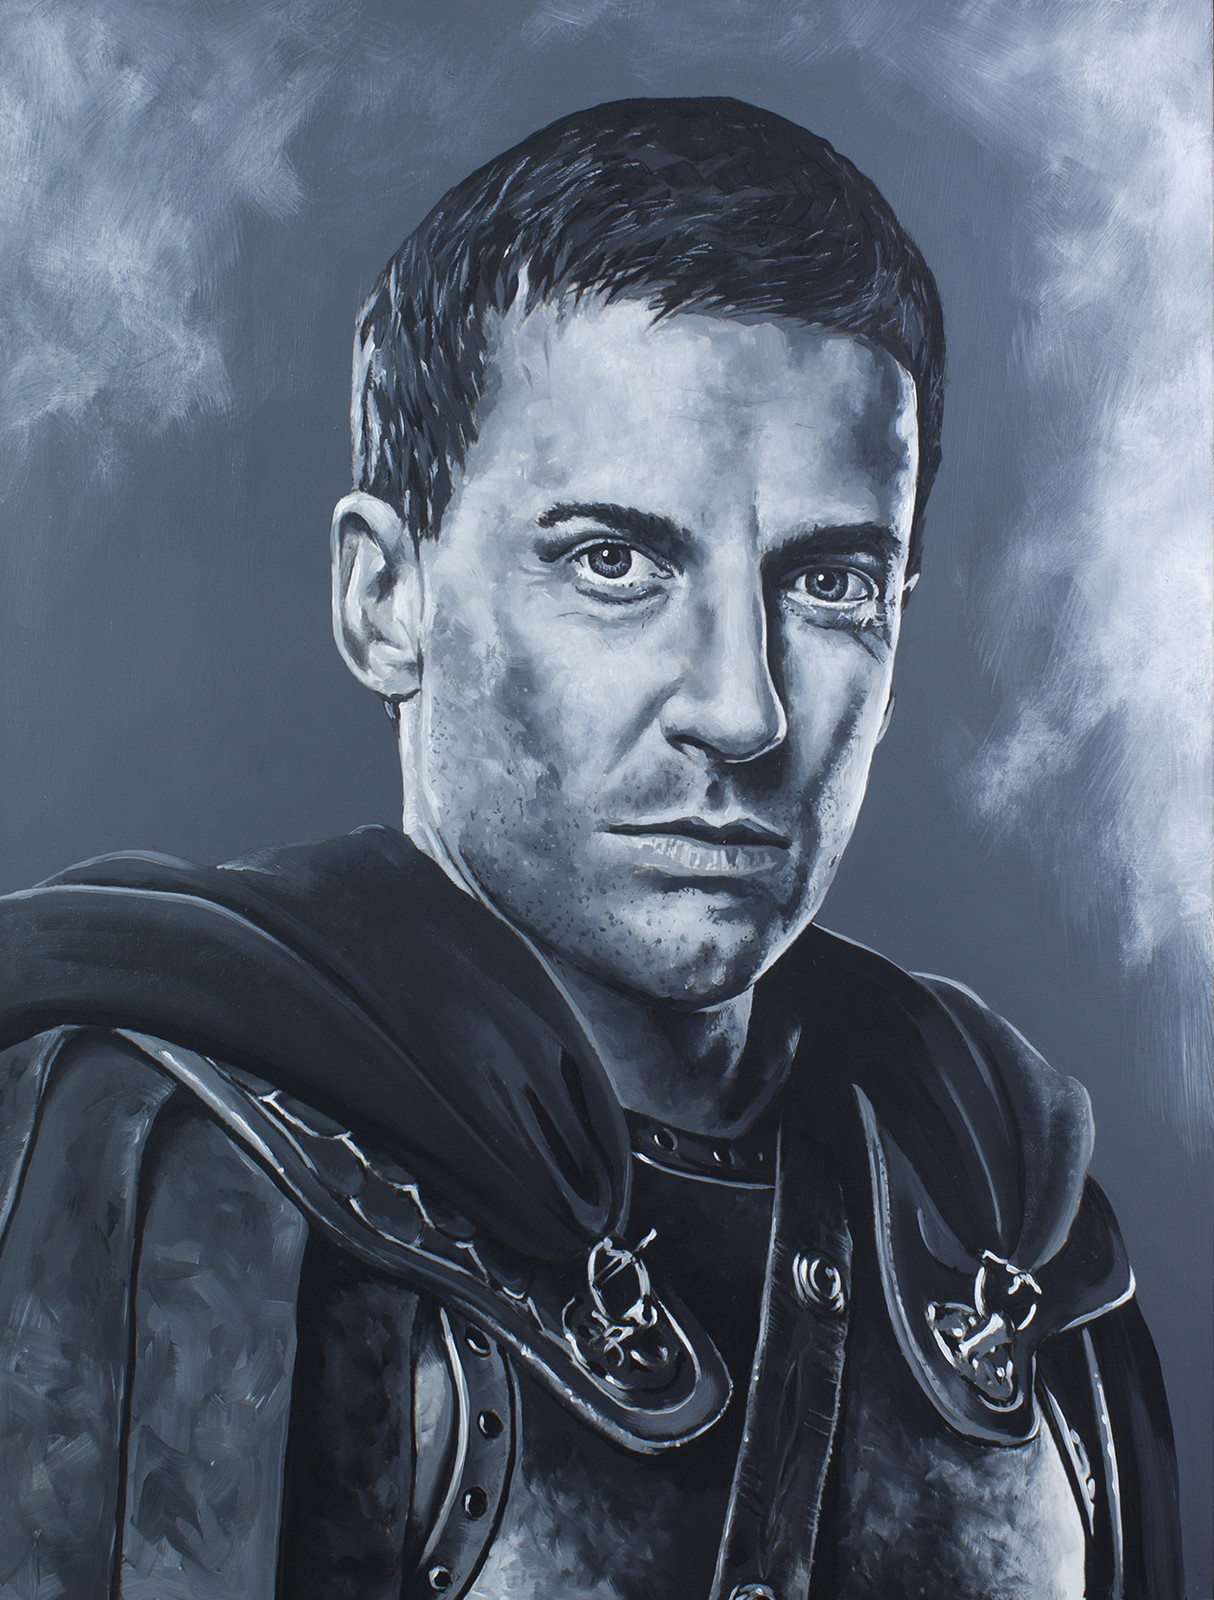 Claudius Glabber - Craig Parker
Spartacus Series - Acrylic on board. 16x20